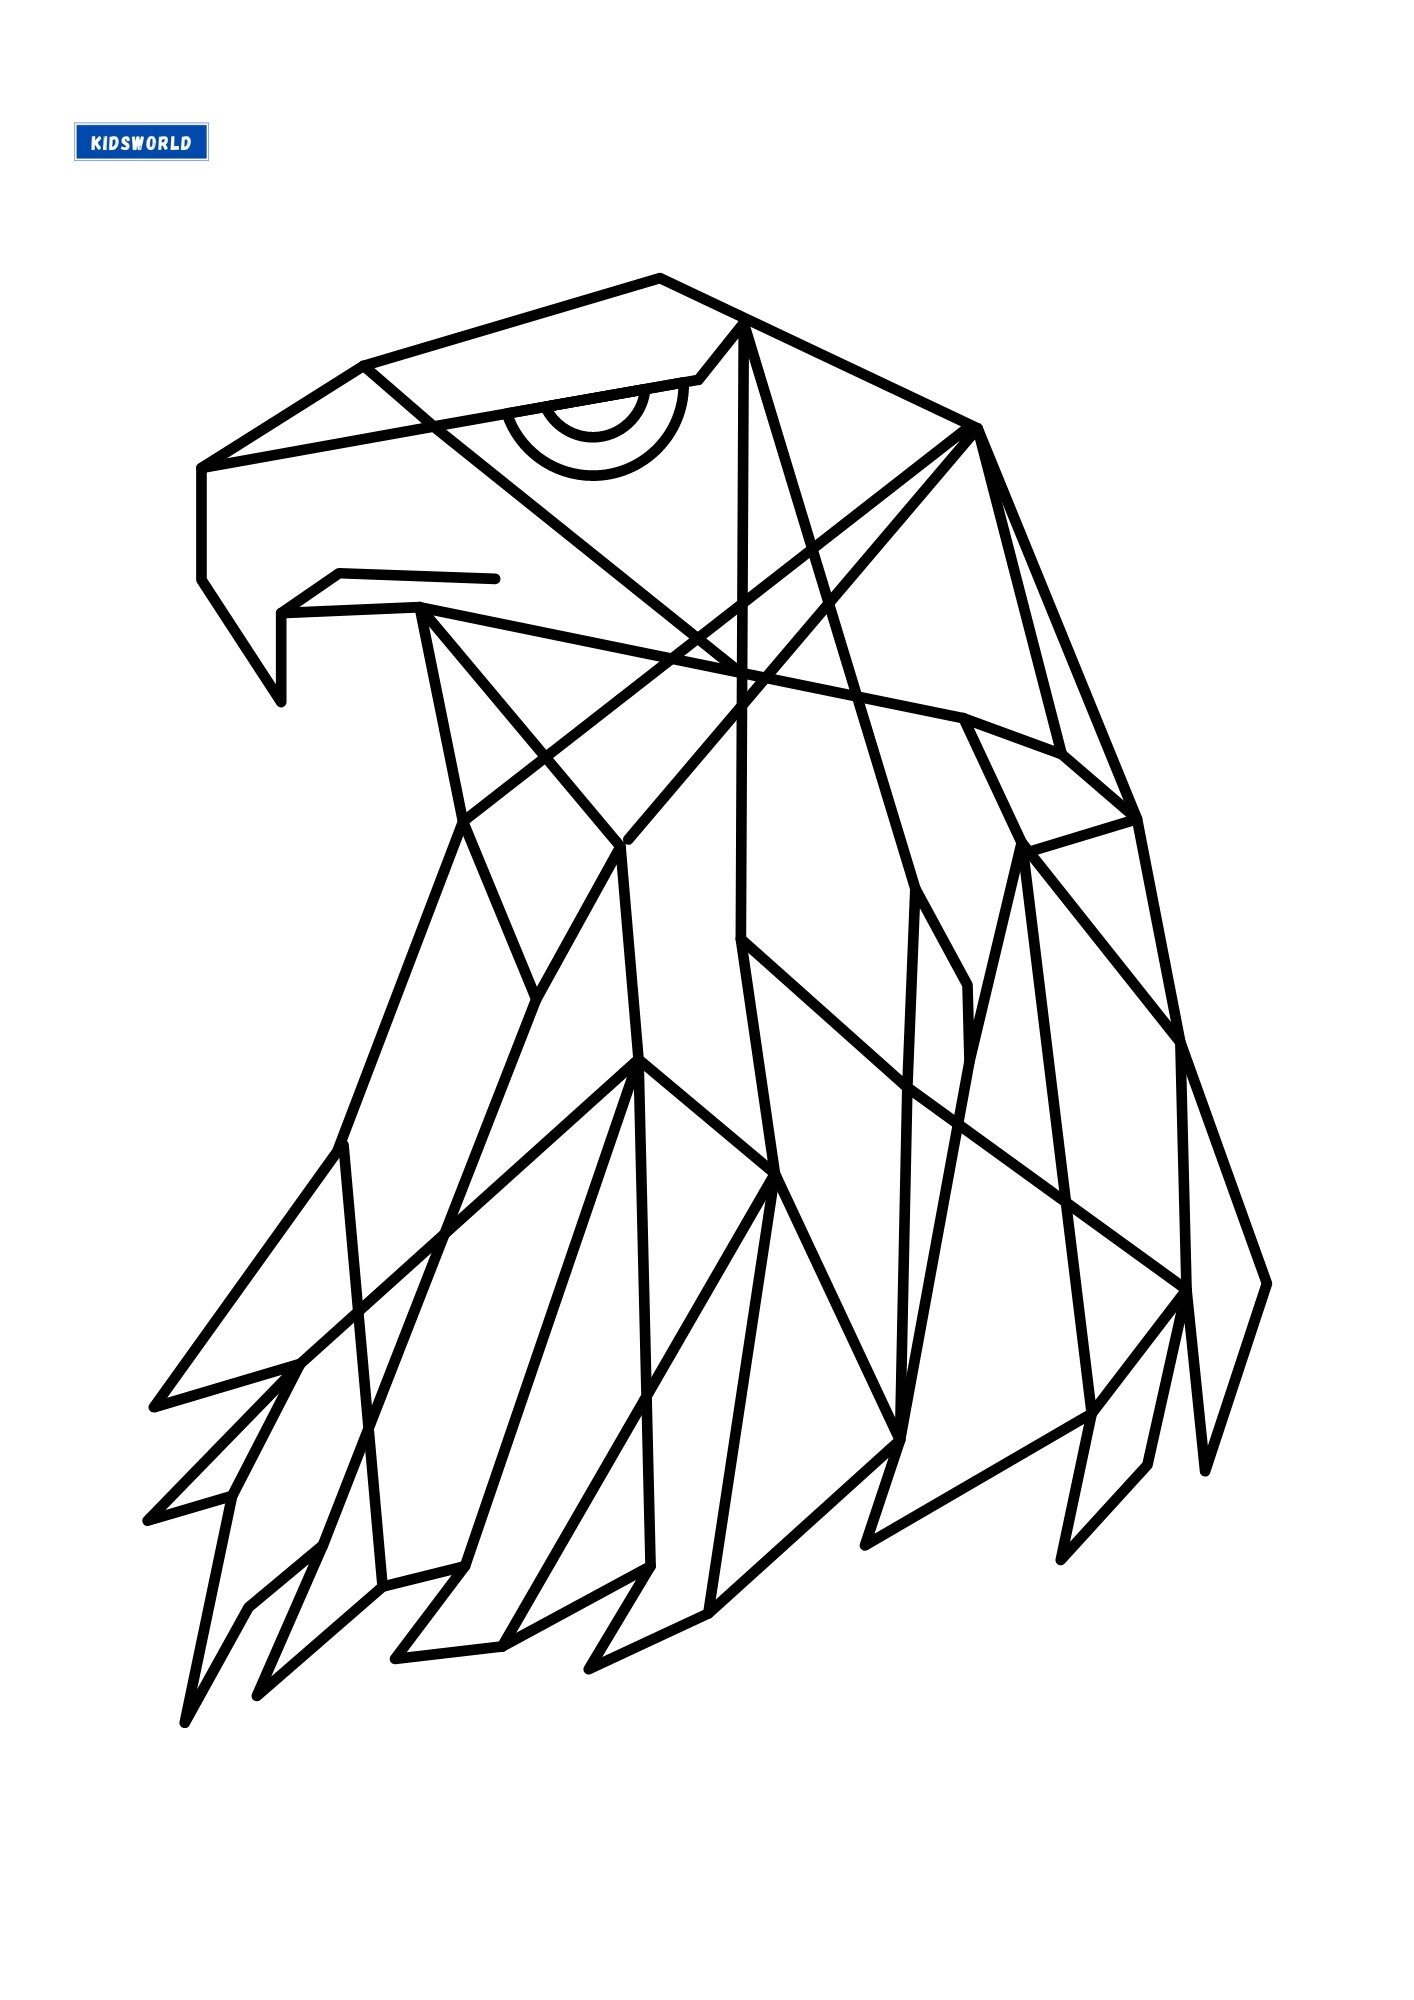 Geometric animal printable coloring pages mindful coloring stress relief coloring creative coloring relax coloring digital pdf